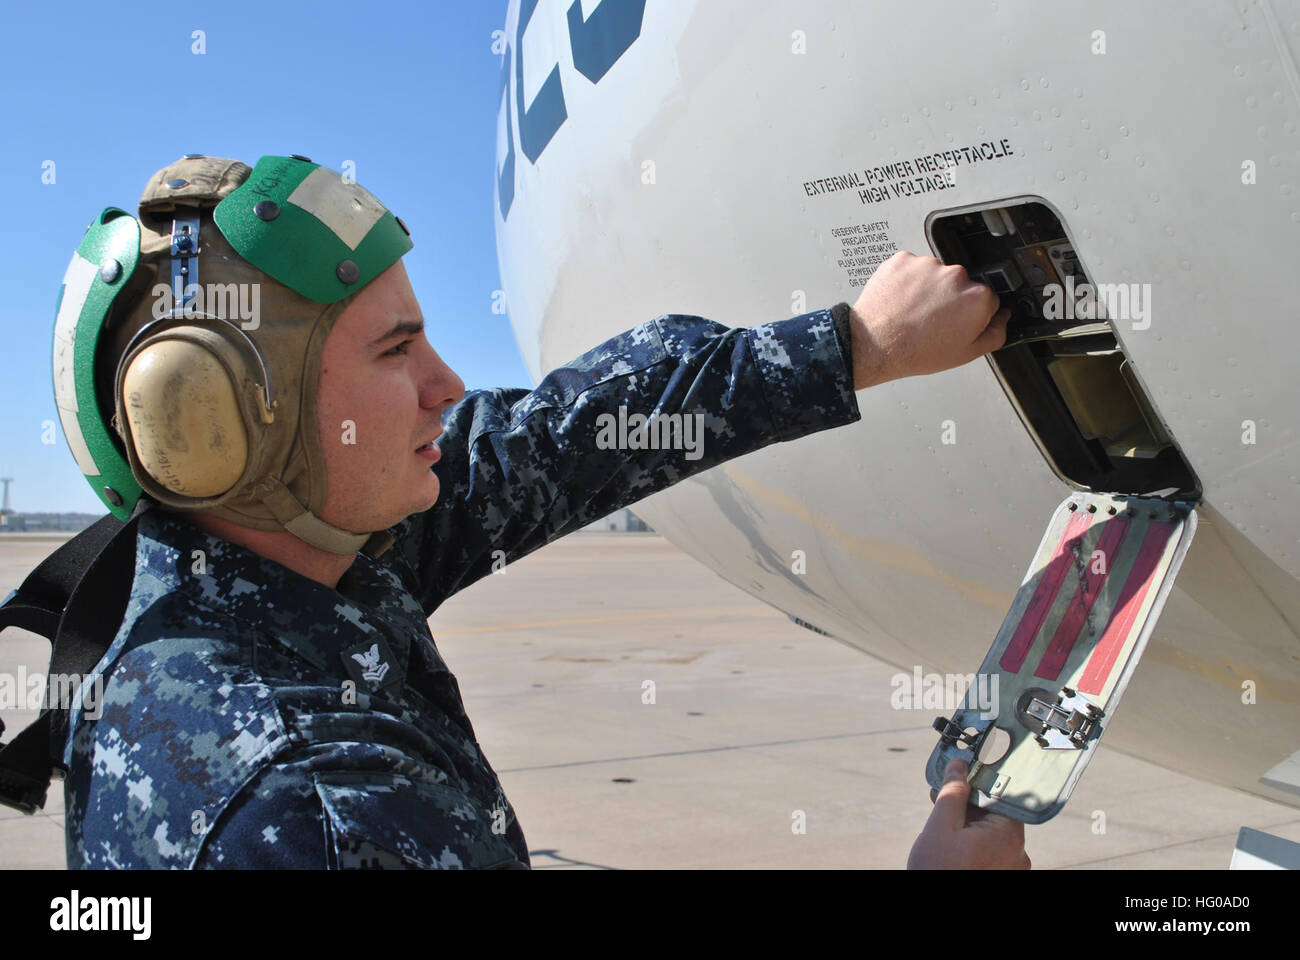 111207-N-GO535-1100  FORT WORTH, Texas (Dec. 7, 2011) Aviation Machinist's Mate 2nd Class Ron Dischler, assigned to Fleet Logistics Support Squadron (VR) 59, inspects the ground power outlet of a C-9B Skytrain II aircraft. Fleet logistics support squadrons operate on a worldwide basis to provide responsive, flexible, and rapid deployable air logistics support required to sustain combat operations at sea. (U.S. Navy photo by Mass Communication Specialist 2nd Class Ron Kuzlik) US Navy 111207-N-GO535-100 Aviation Machinist's Mate 2nd Class Ron Dischler inspects the ground power outlet of a C-9B S Stock Photo